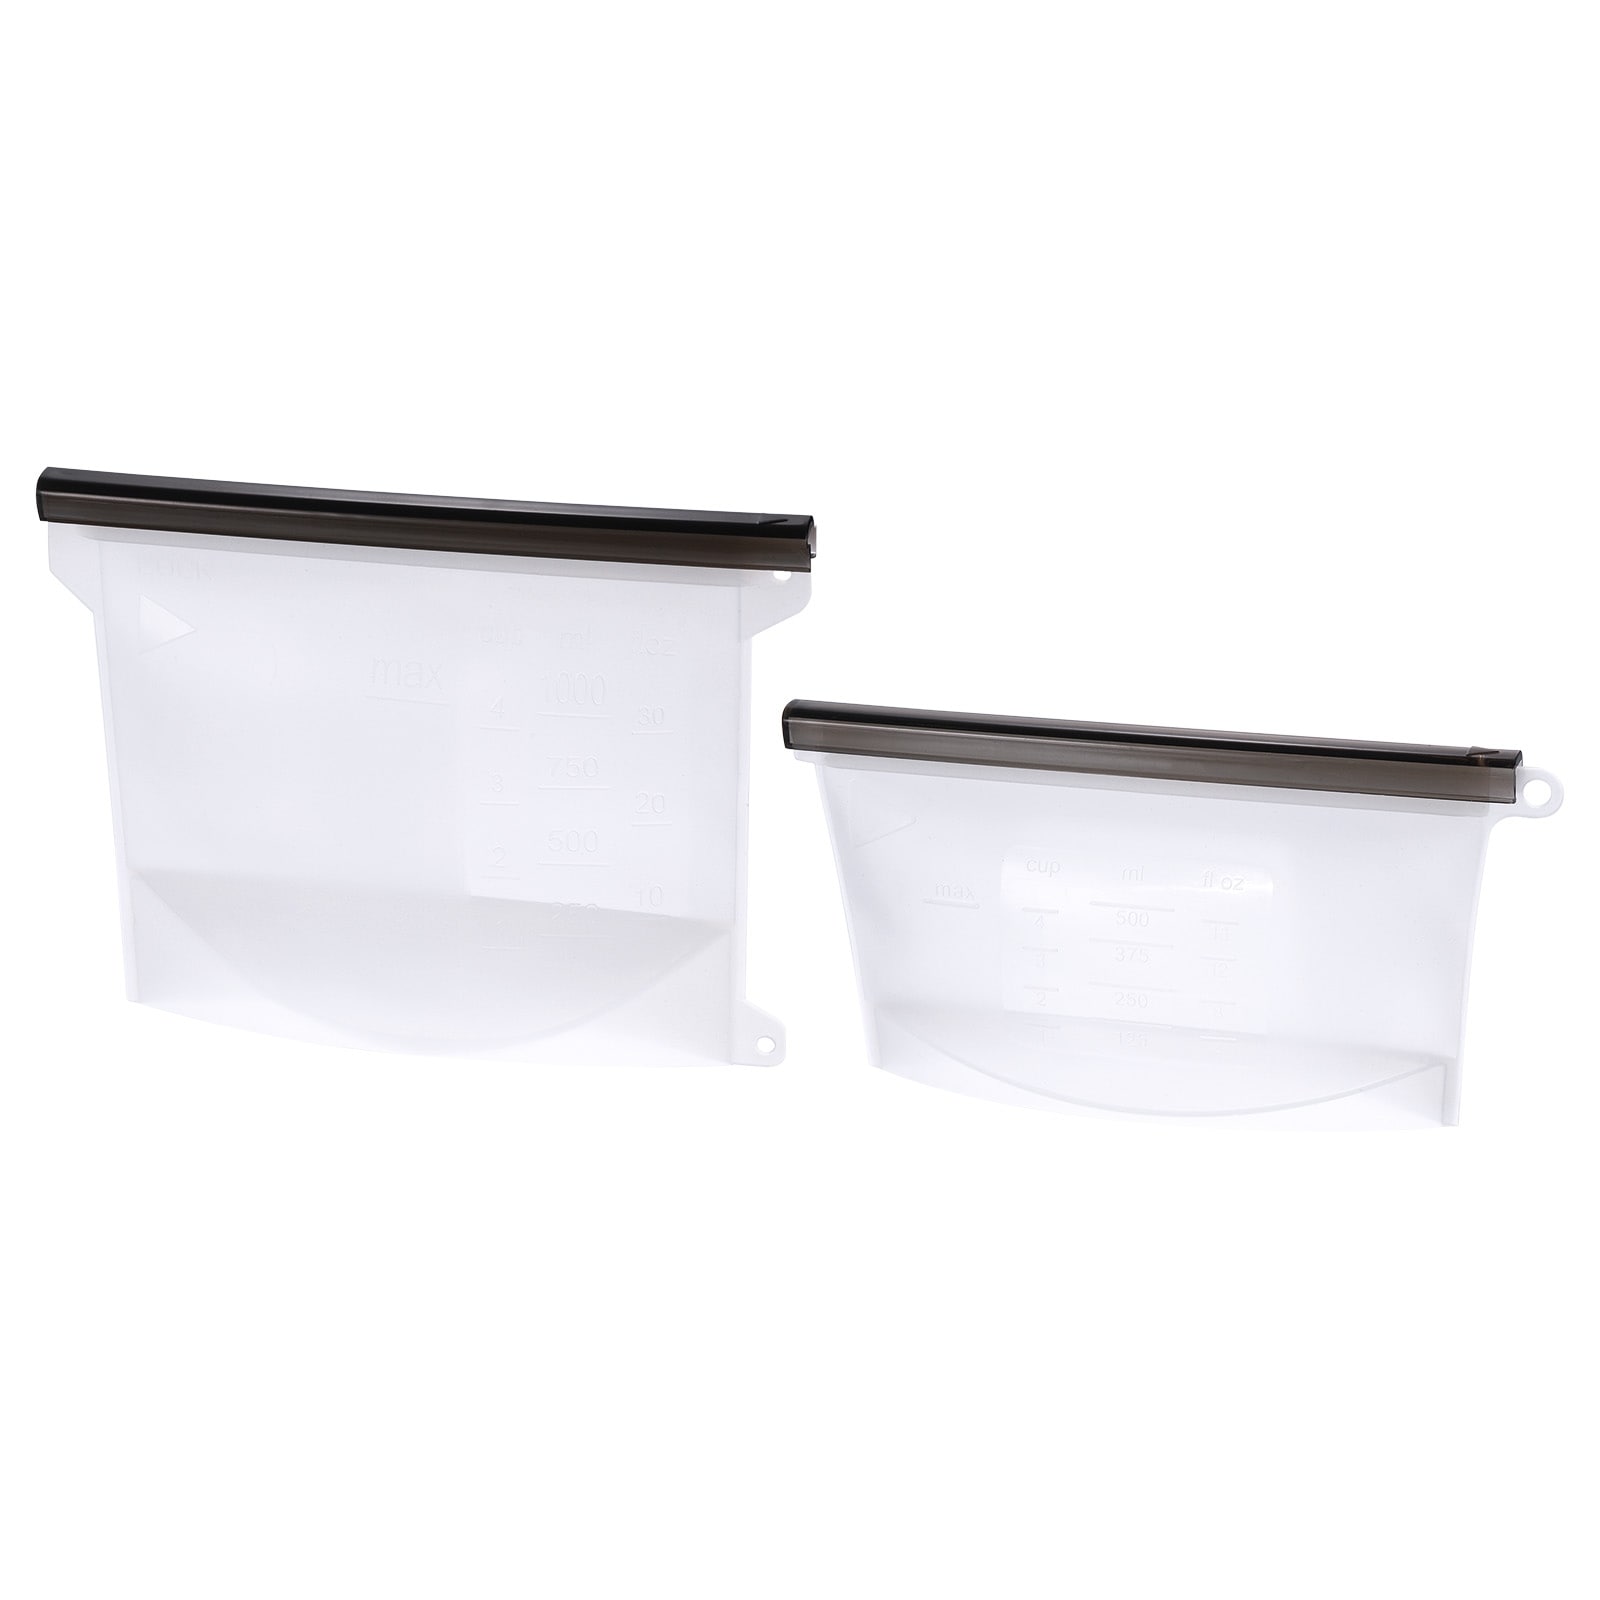 2pcs Airtight Food Storage Container, Reusable Food Preservation